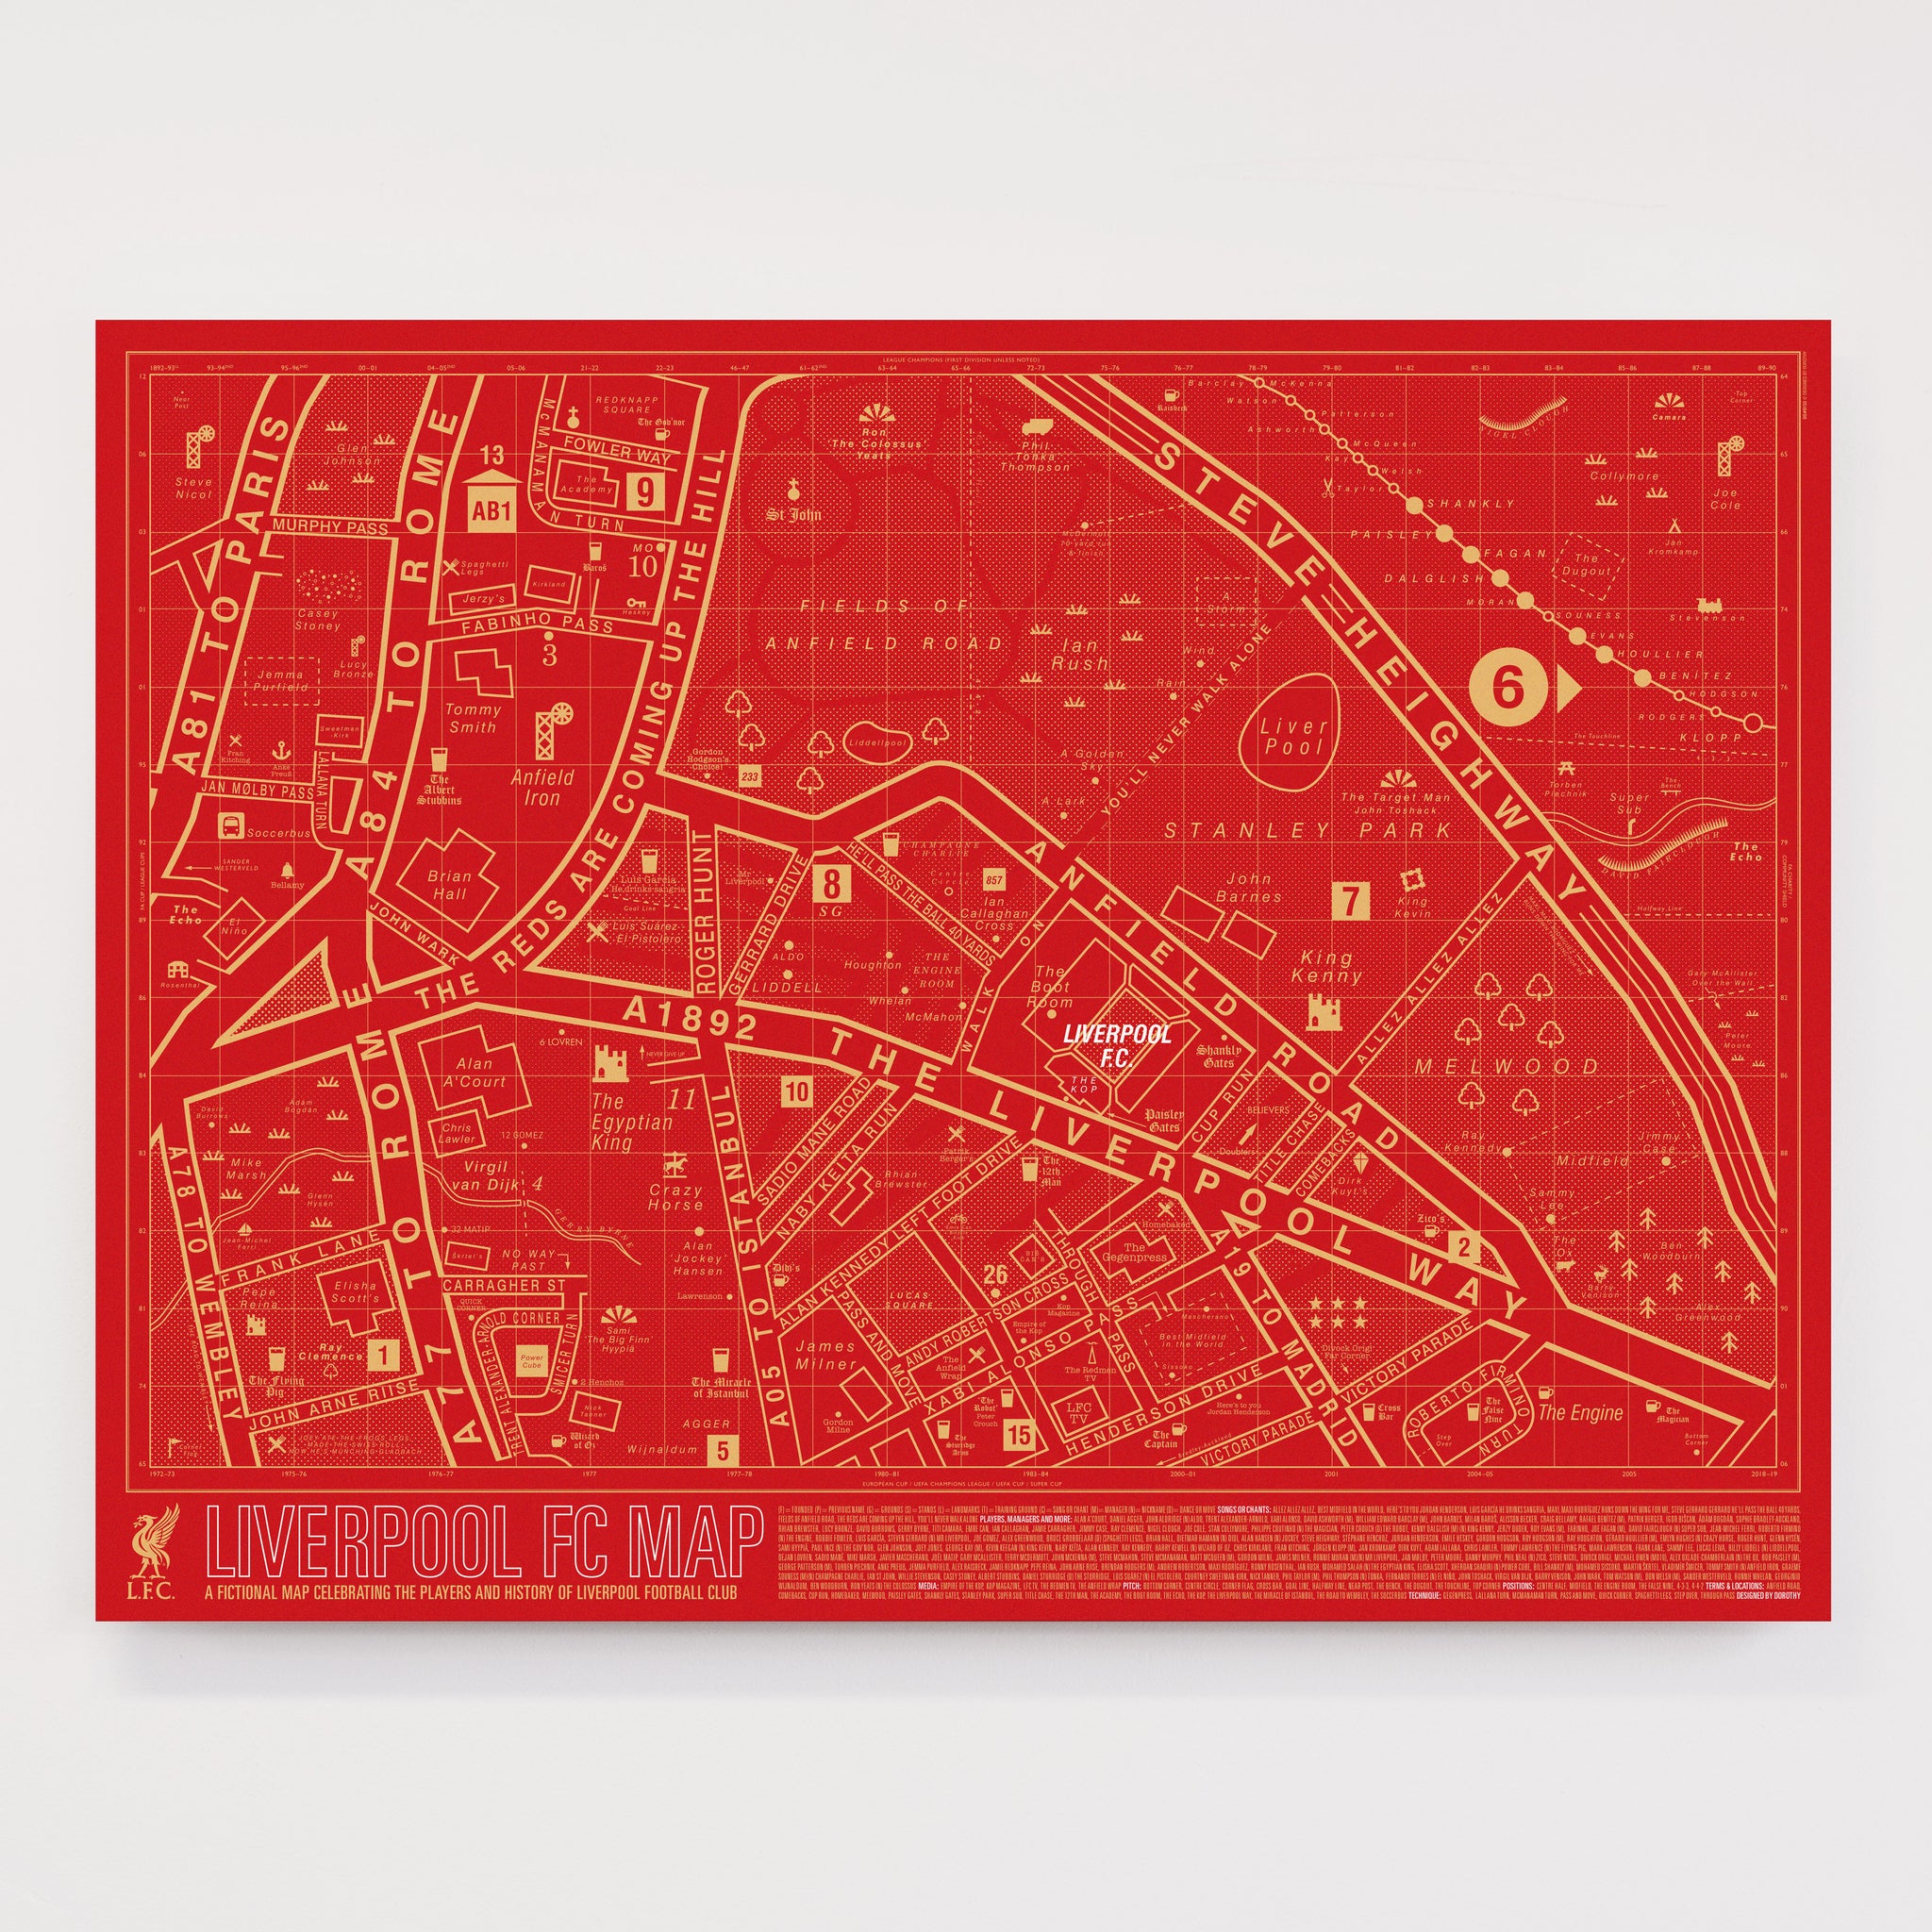 Liverpool FC Map - Exclusive Edition for Liverpool Football Club